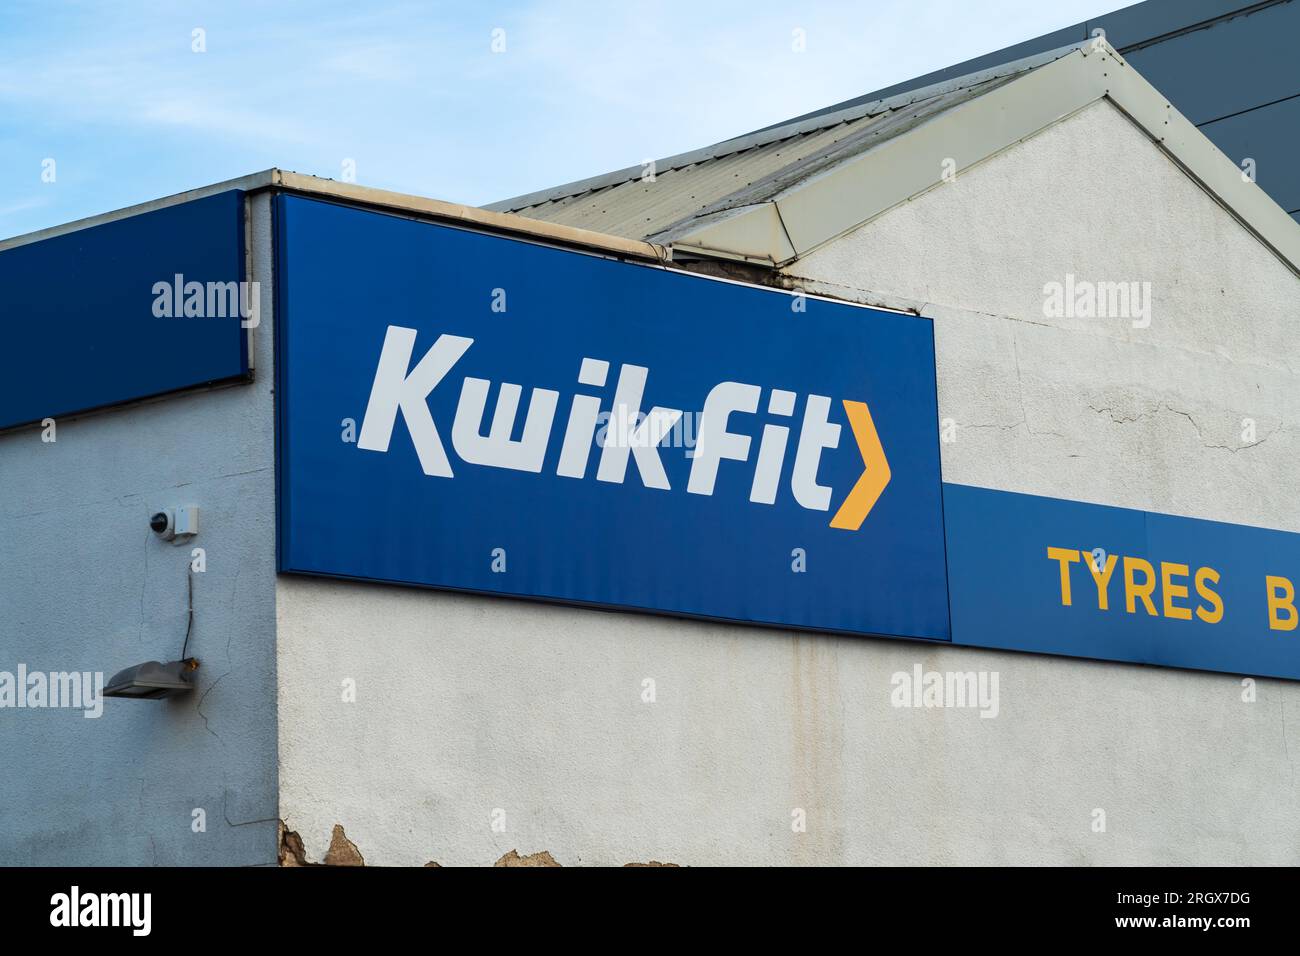 Wolverhampton, UK - August 11 2023: Kwik Fit company logo and signage on the Exterior of the Wolverhampton City Centre Store Stock Photo